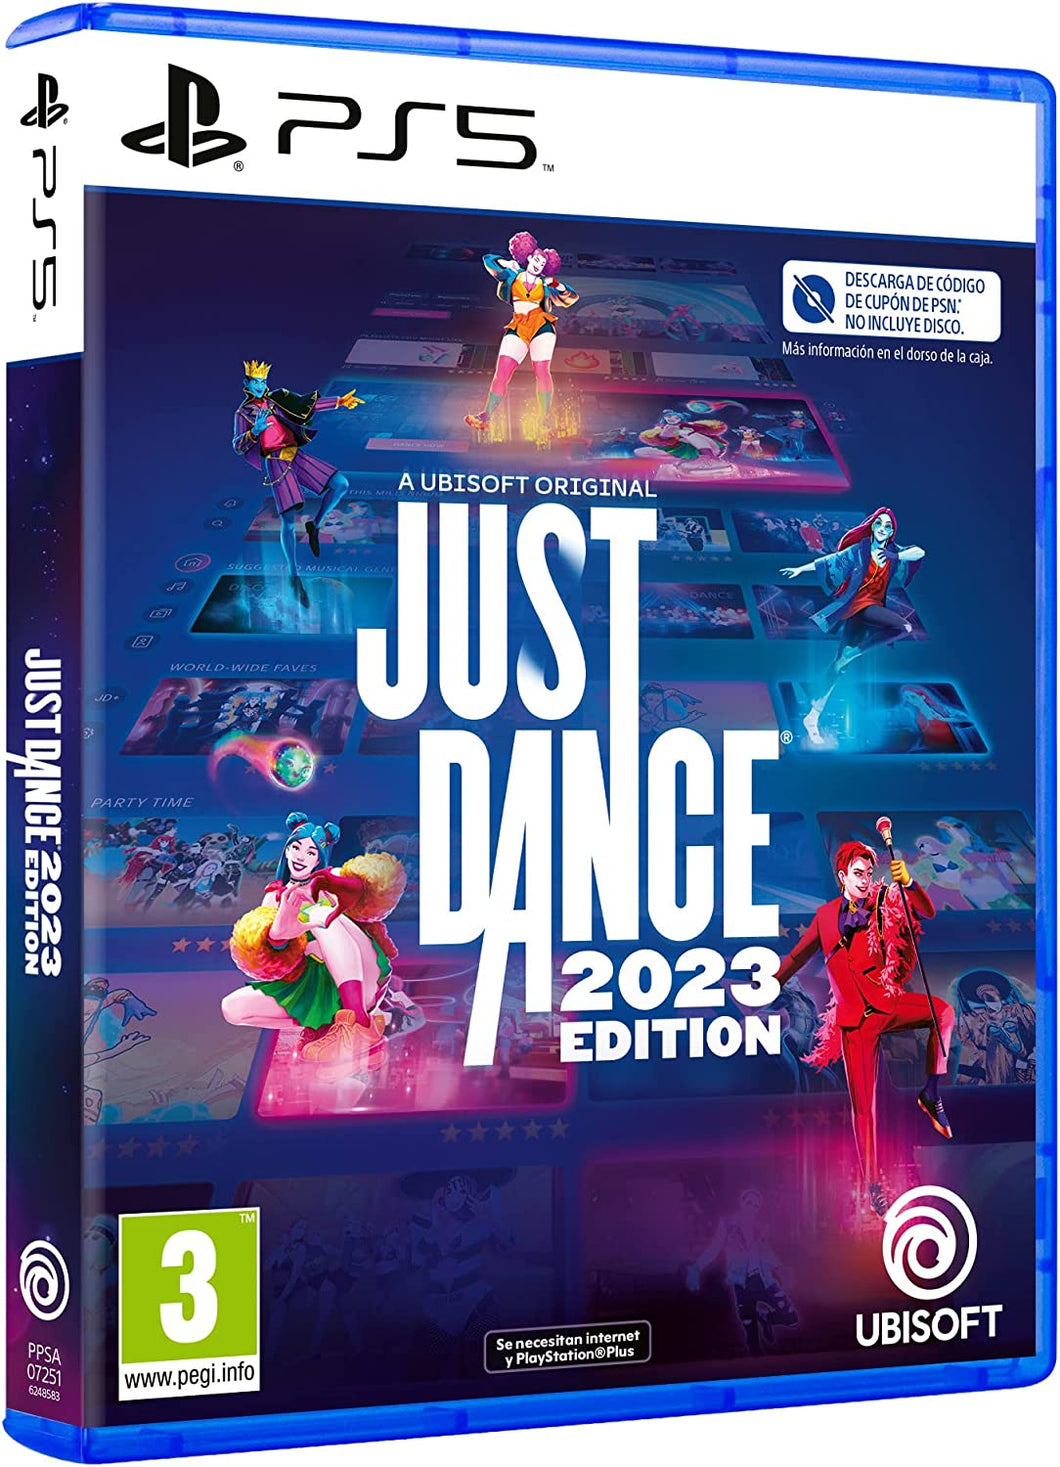 SONY PS5 JUST DANCE 2023 CIB GAME (Download Code)